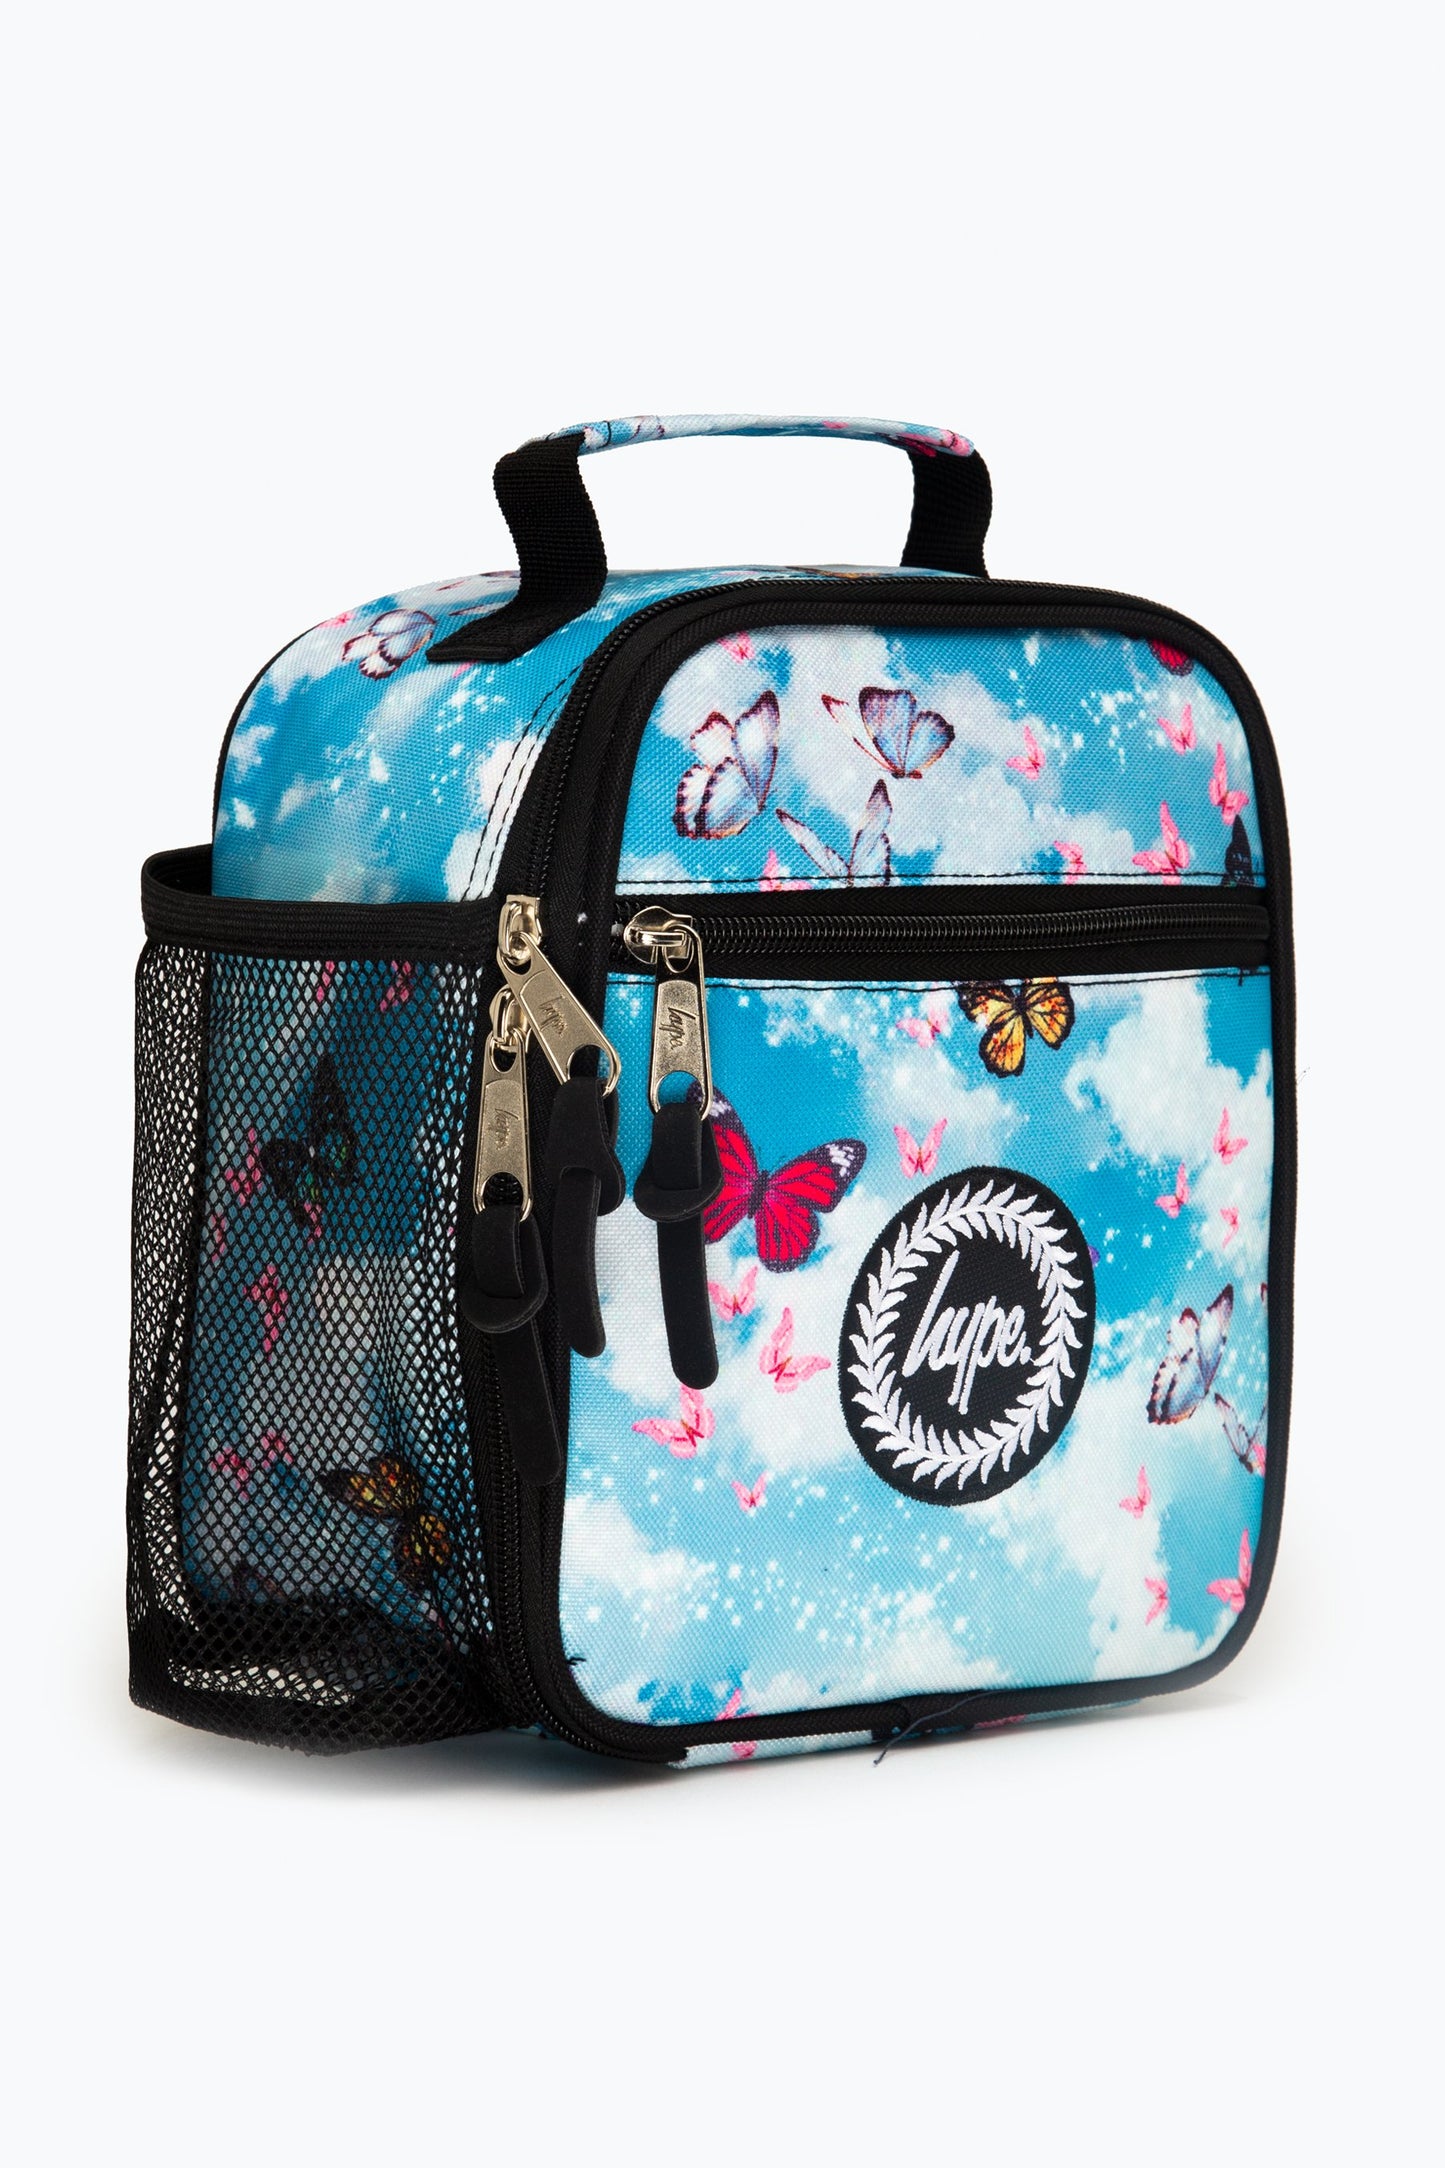 HYPE GLITTER BUTTERFLY SKIES LUNCH BAG